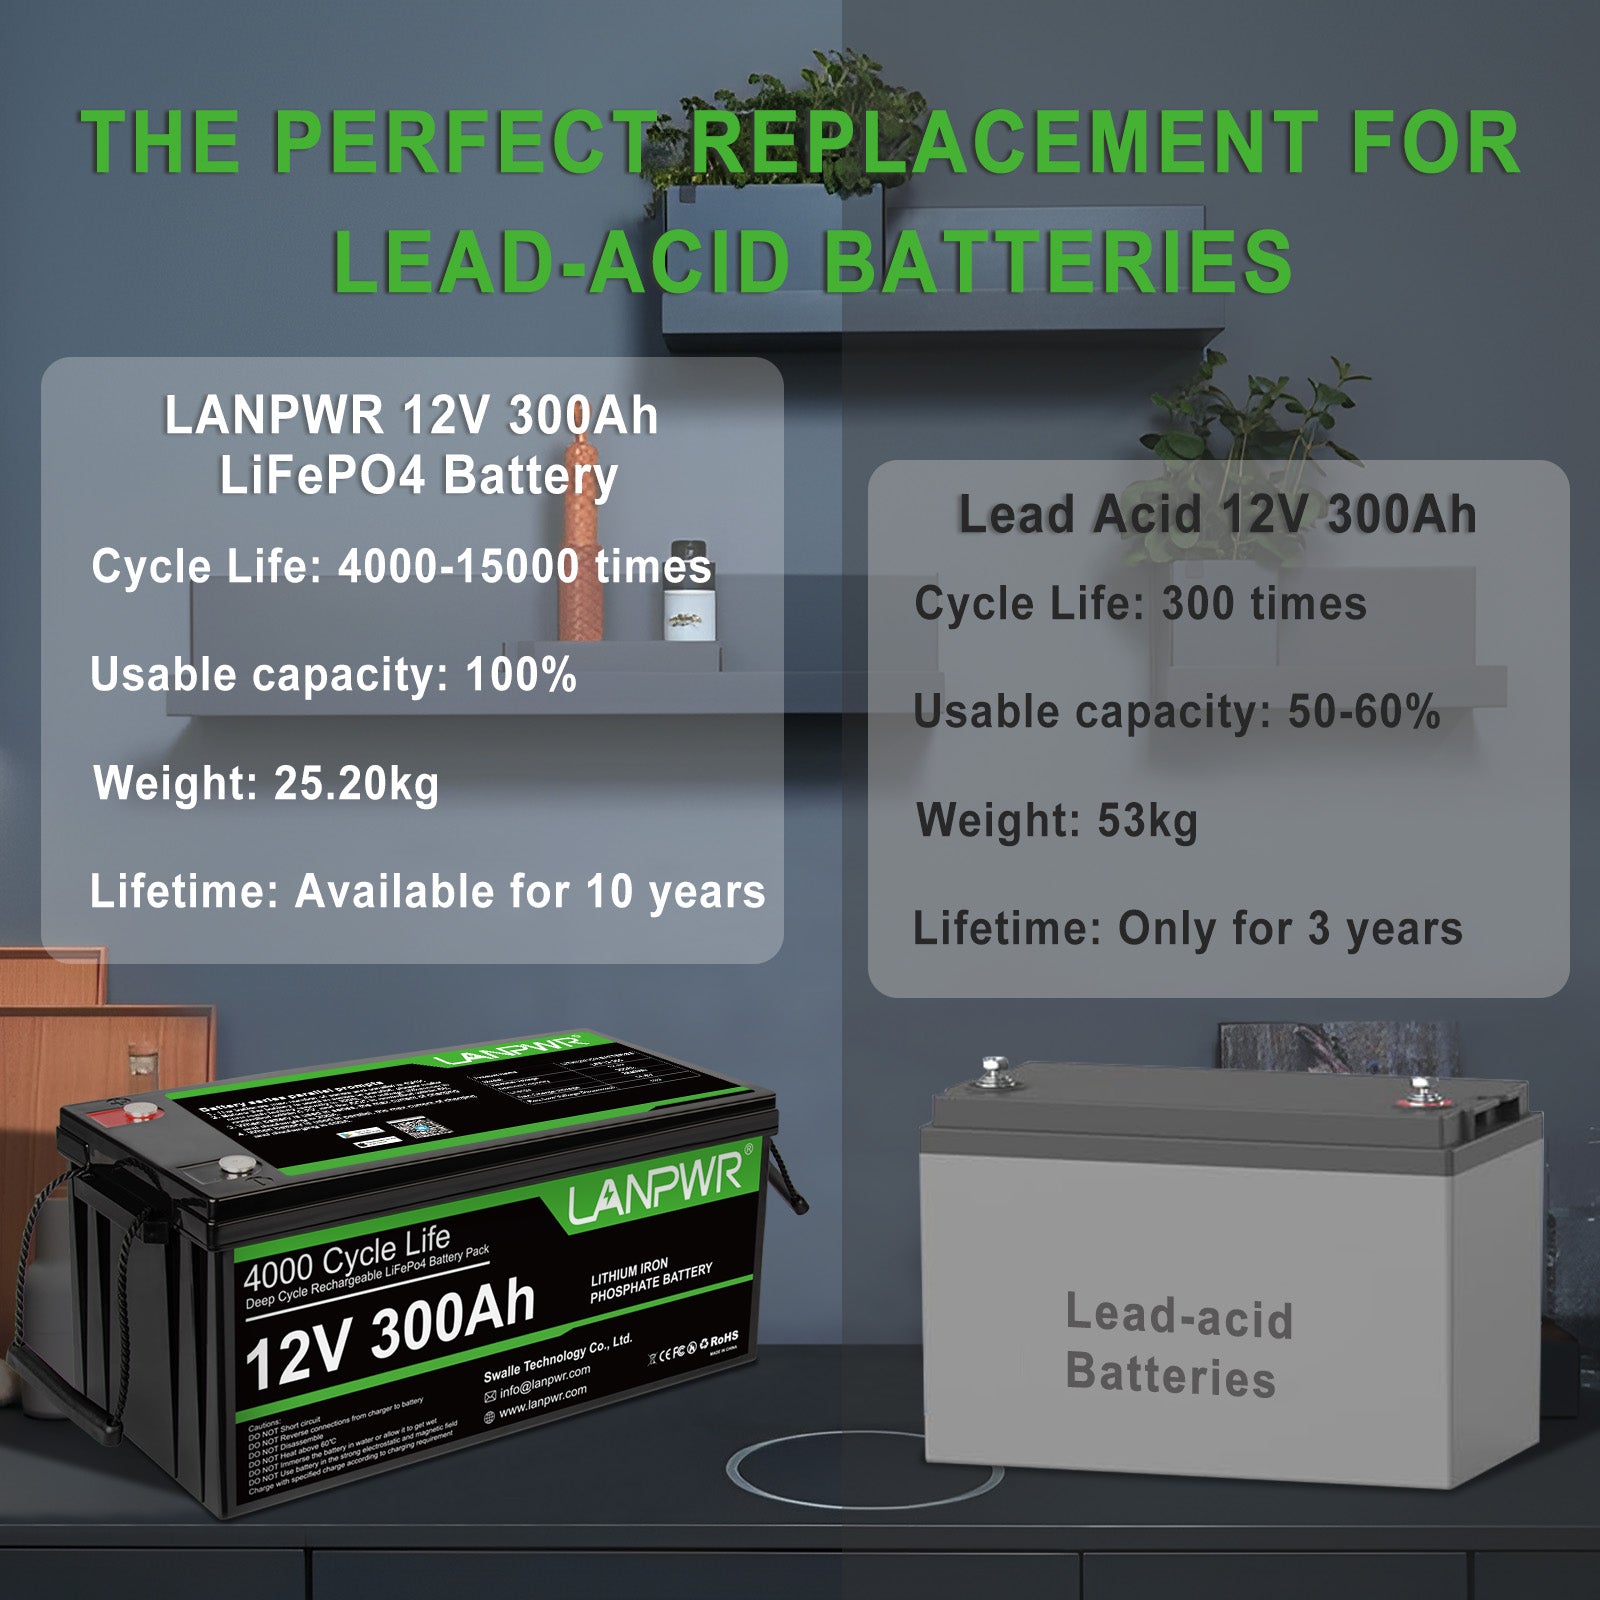 LANPWR 12V 300Ah LiFePO4 Battery with Bluetooth 5.0, Maximum Load Power 2560W, 3840Wh Energy